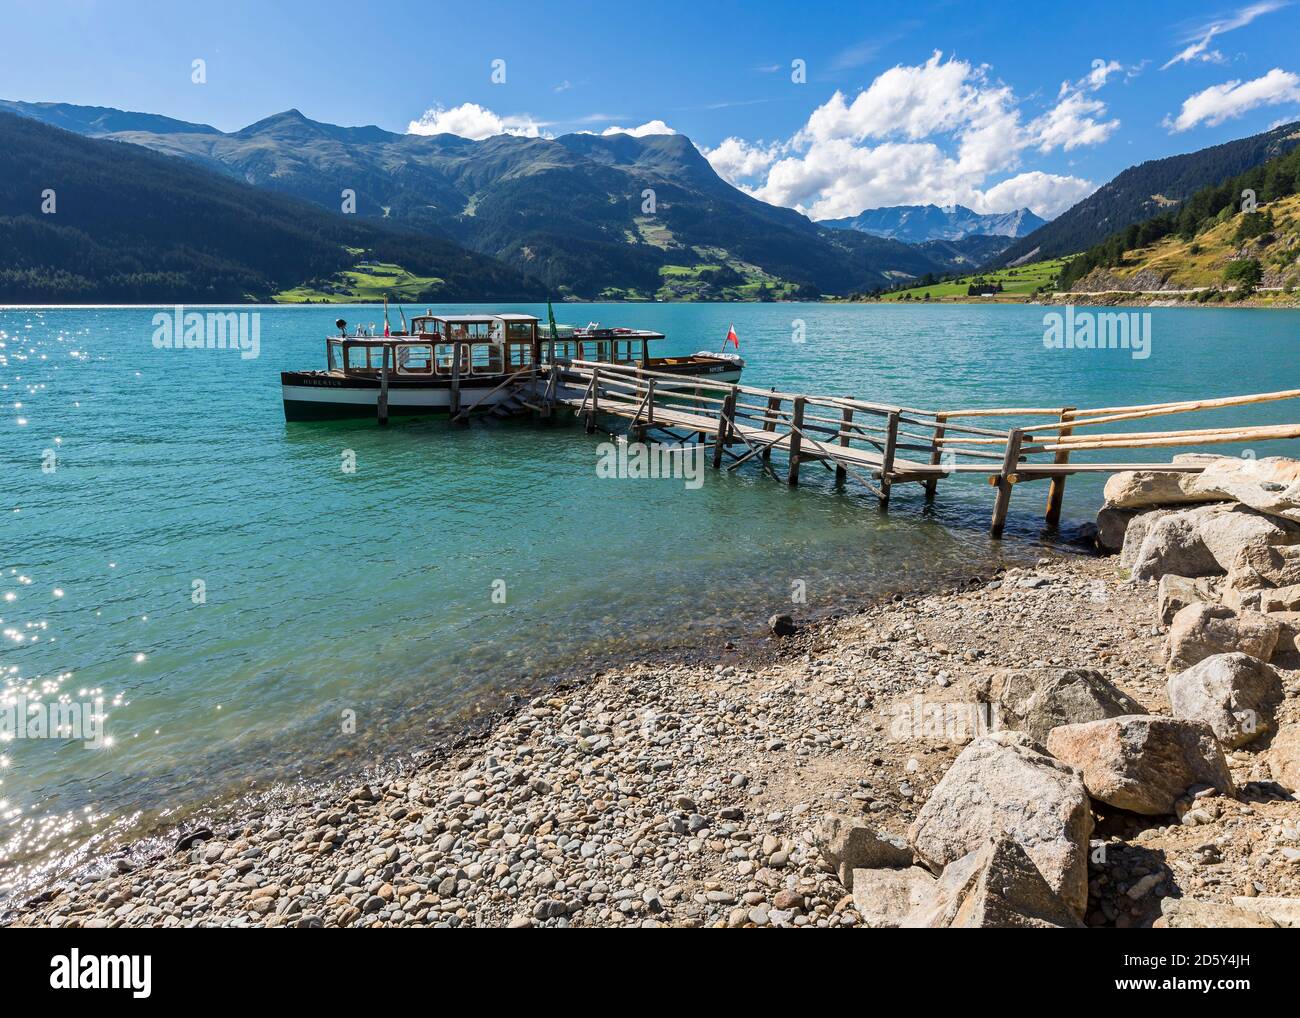 Italy, South Tyrol, Vinschgau Province, Reschensee Lake, boat on jetty Stock Photo